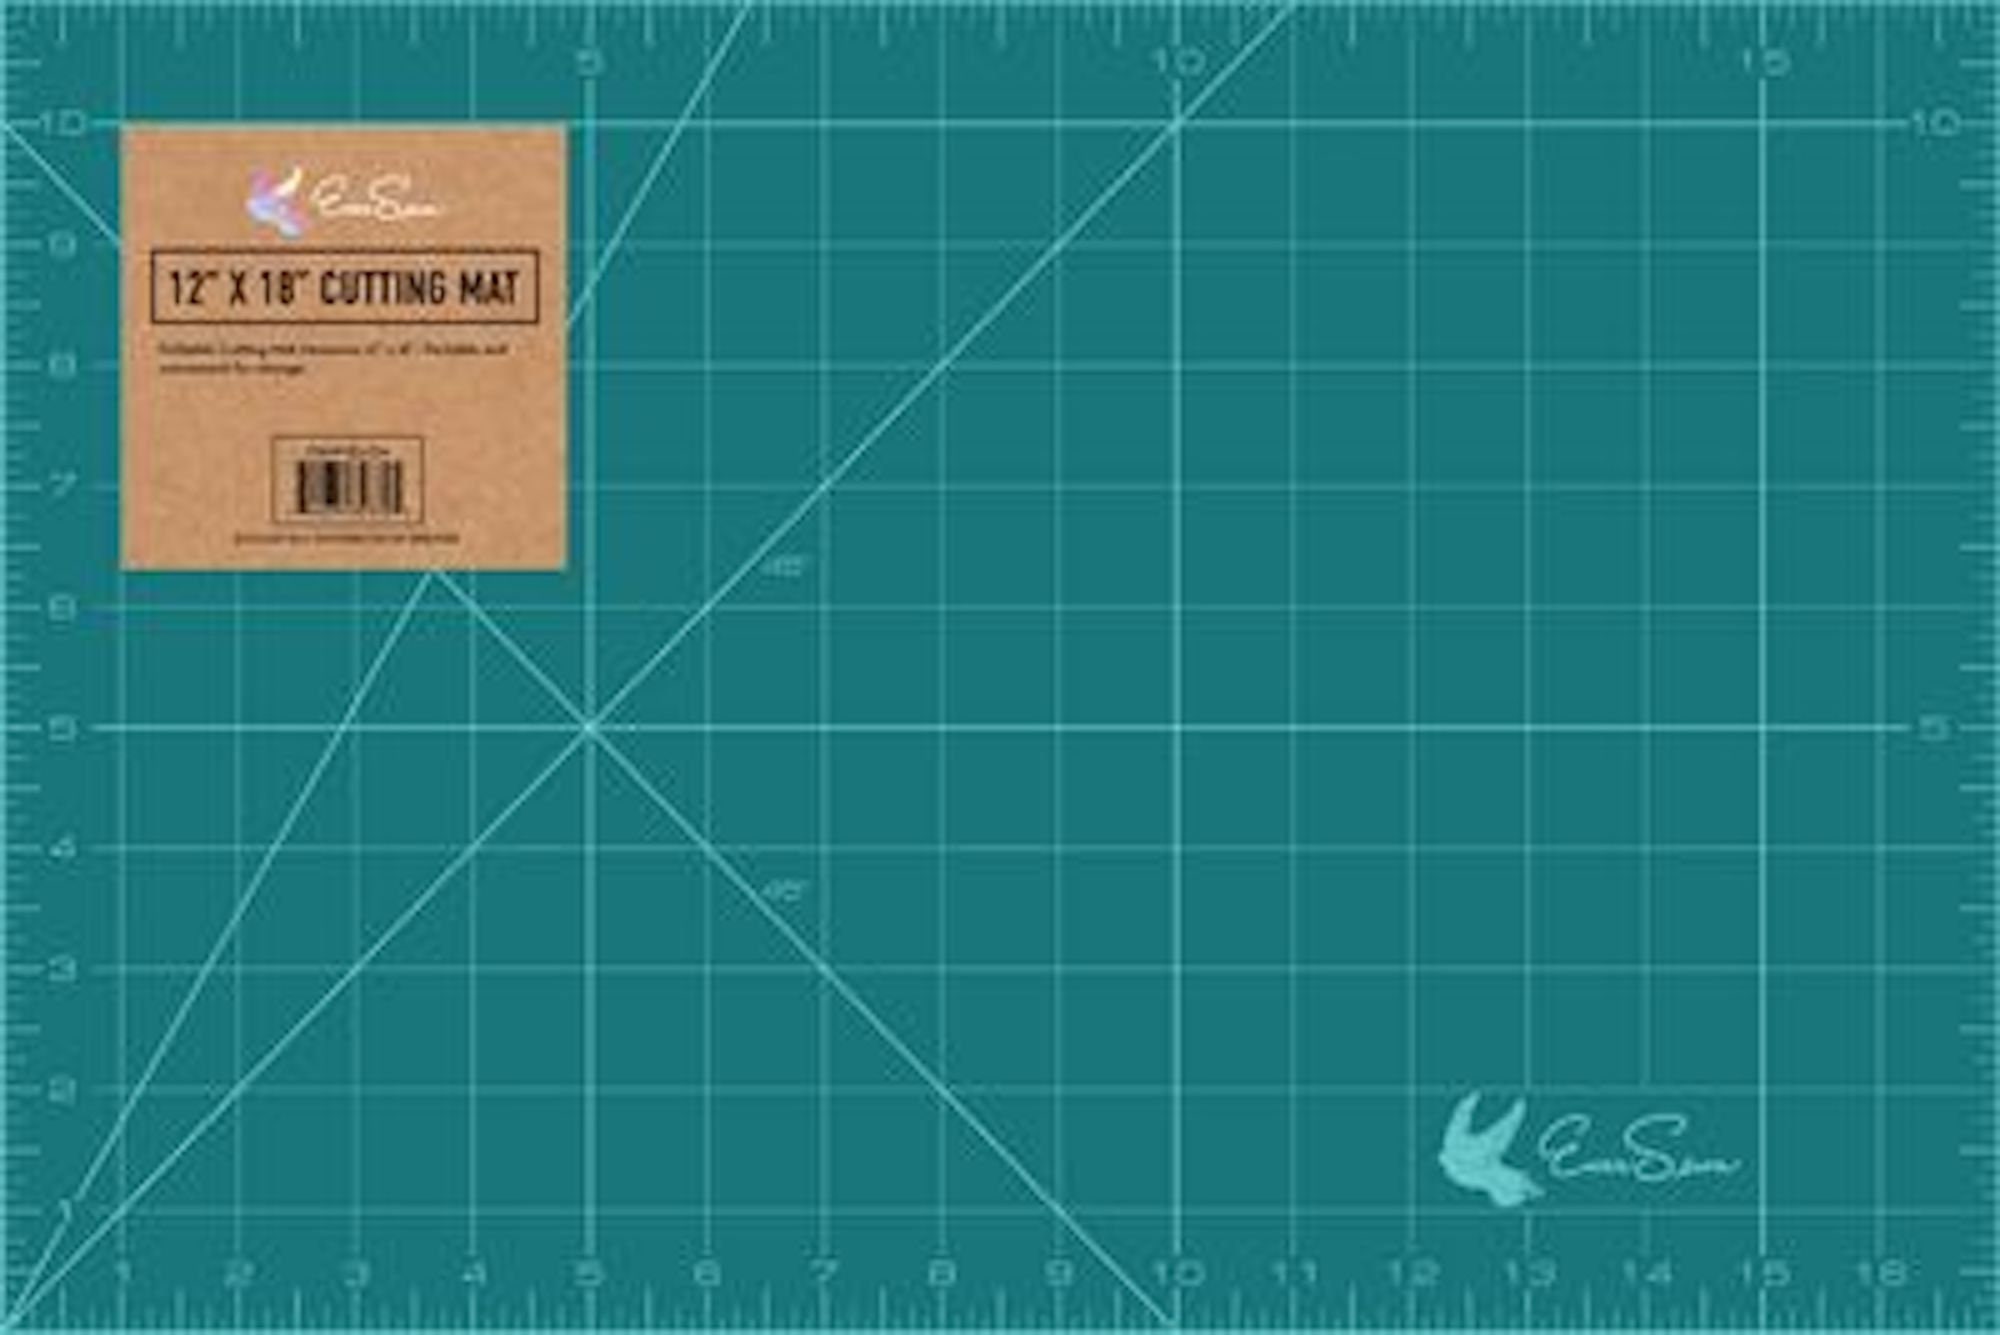 Size A3 12 X 18 Self-healing CUTTING MAT Reversible Inches and